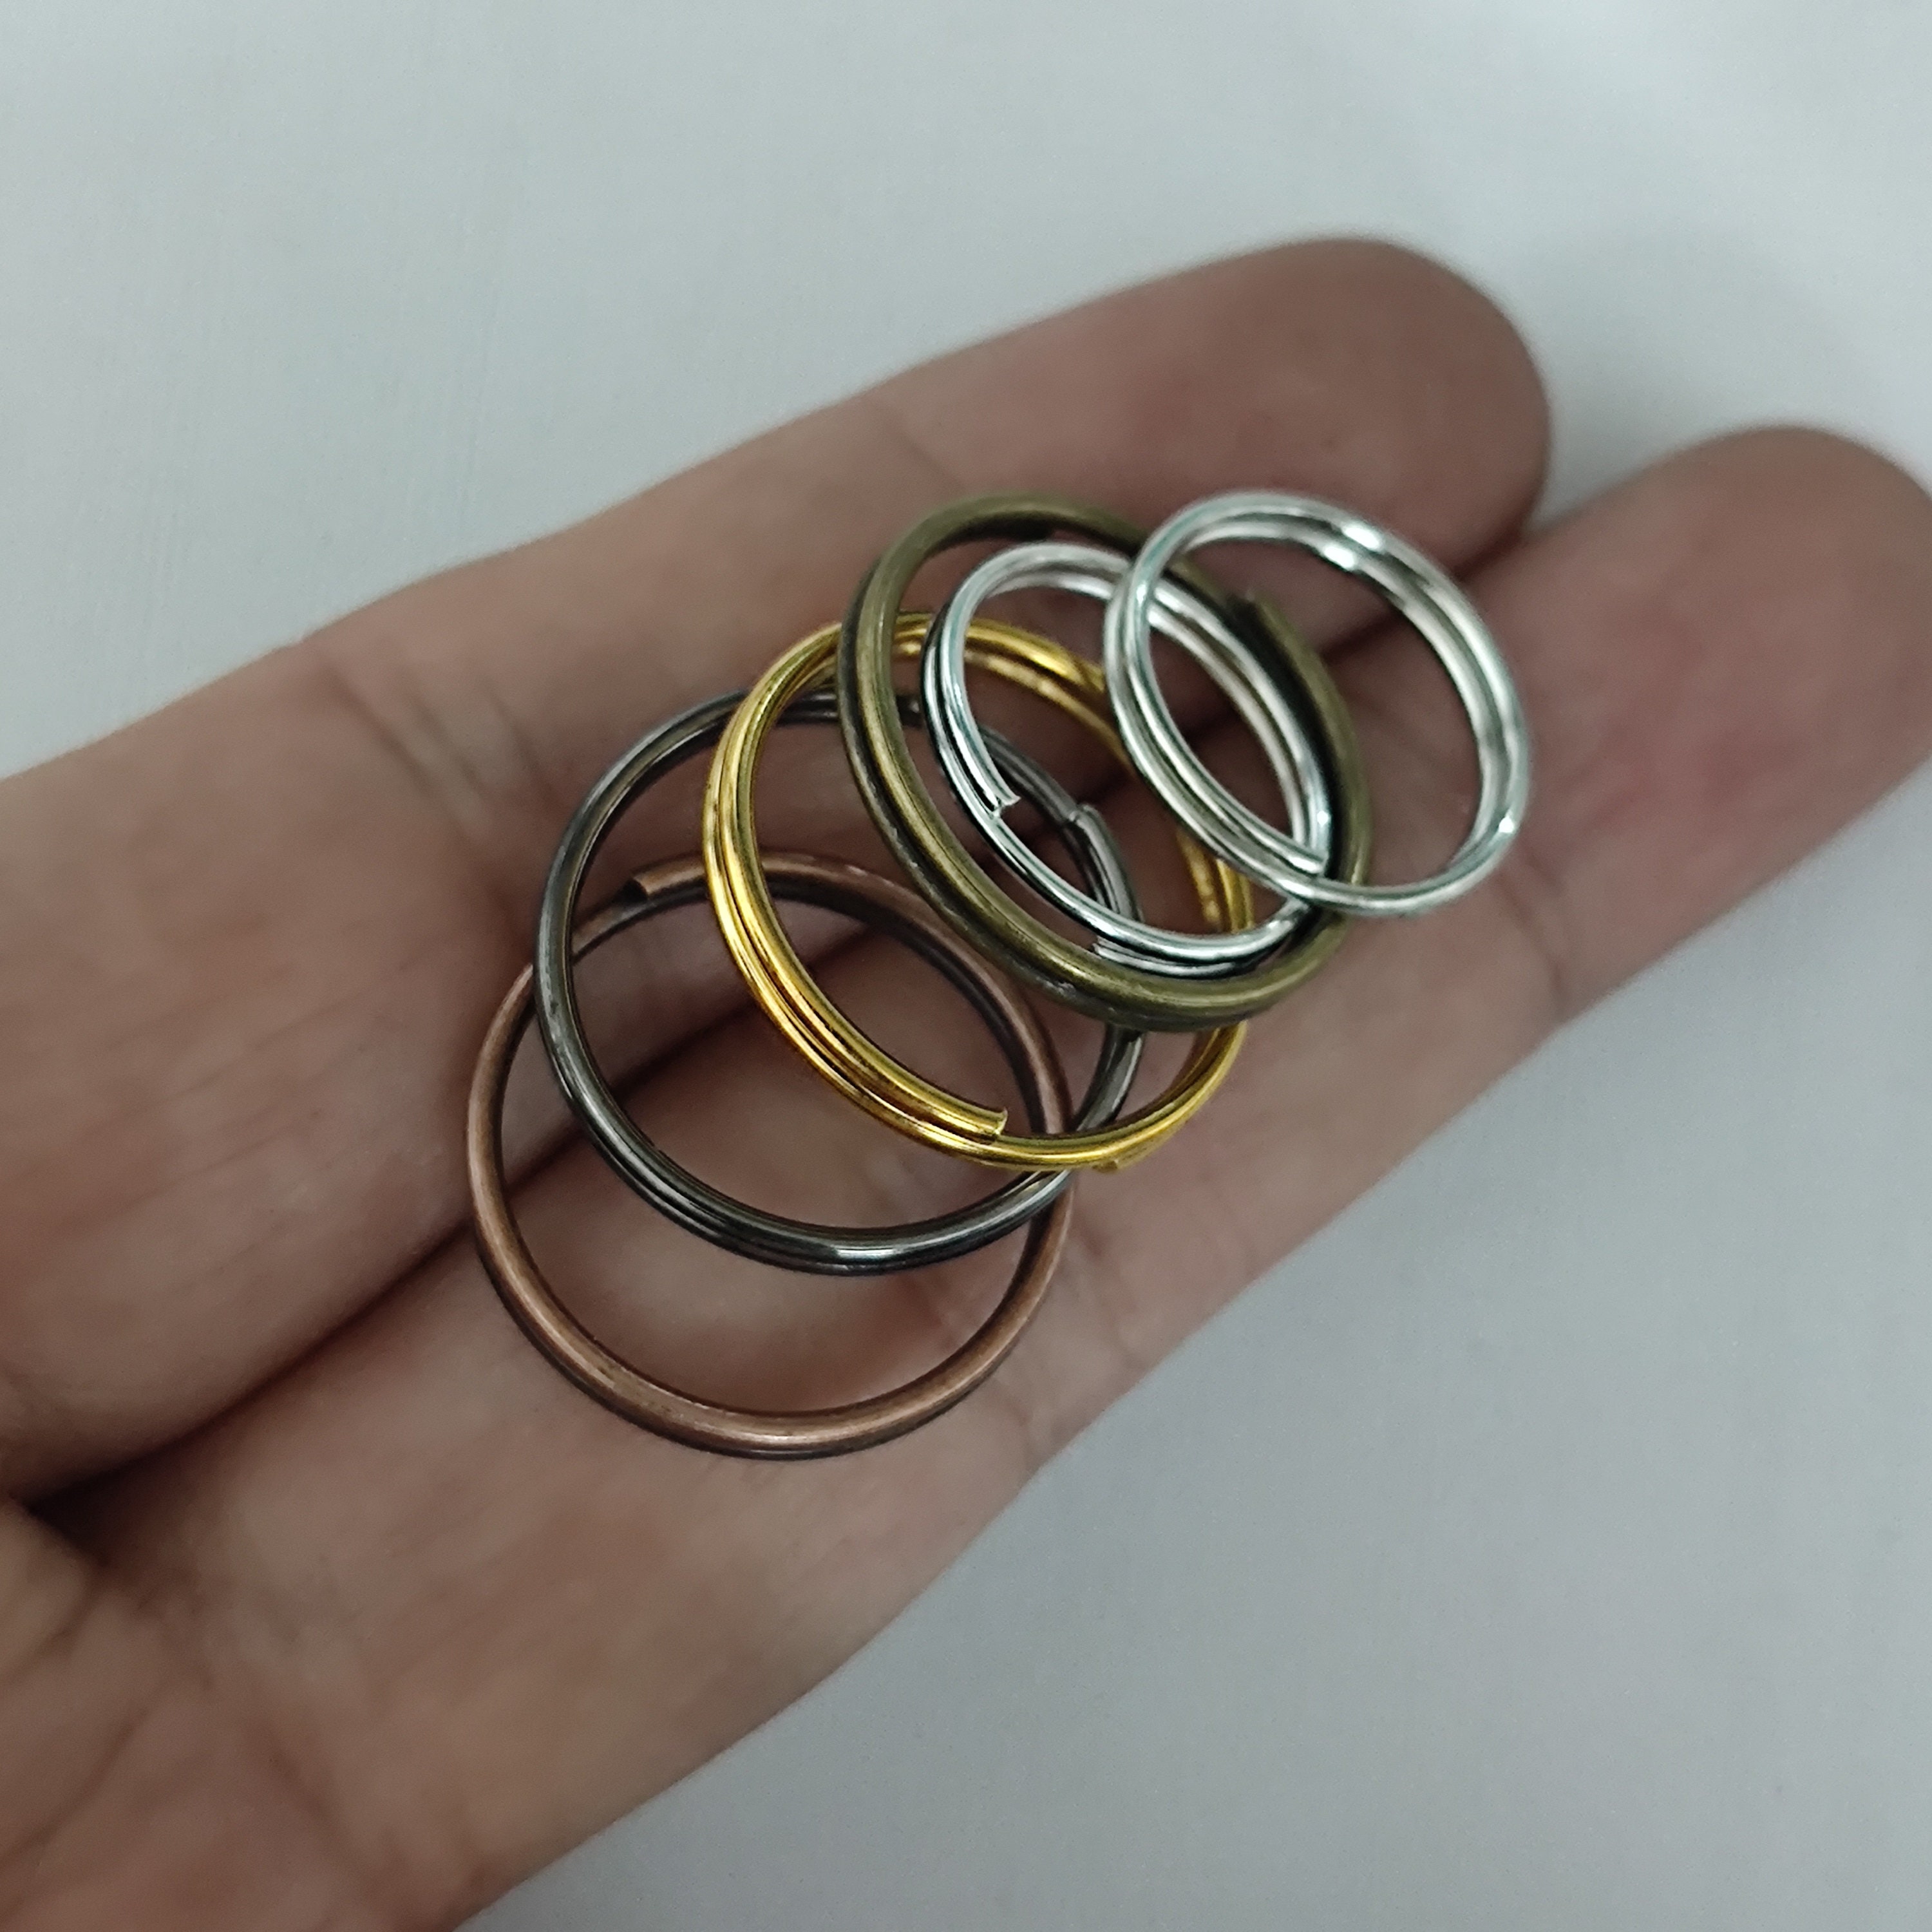 Silver Keychain Rings, 10 20 50 100 Pcs Key Rings With Chain, Bulk 20mm Key  Chain Ring With Attached Chain, Split Rings Key Rings 0.79 Inch 